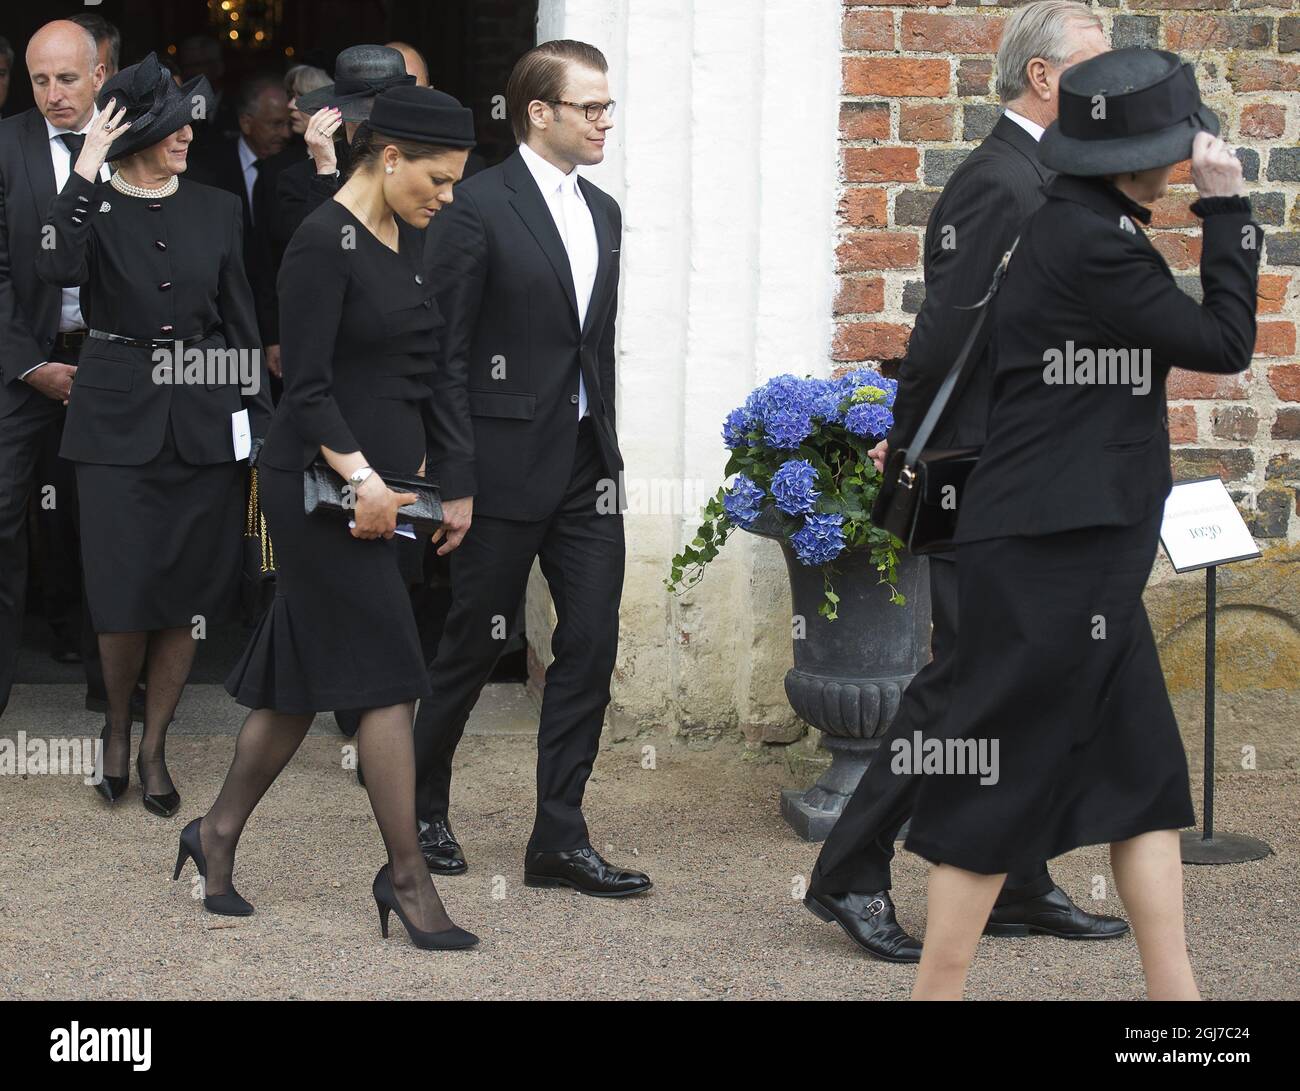 BASTAD 2012-05-14 Queen Anne-Marie of Greec, Princess Benedicte of Denmark, Crown Princess Victoria and Prince Daniel of Sweden and Queen Margrethe and Prince Conosrt Henrik oif Denmark are seen during the funeral of Count Carl Johan Bernadotte in the Maria Church in Bastad, Sweden, May 14, 2012. Foto: Suvad Mrkonjic / XP / SCANPIX / kod 7116 ** OUT SWEDEN OUT T ** Stock Photo